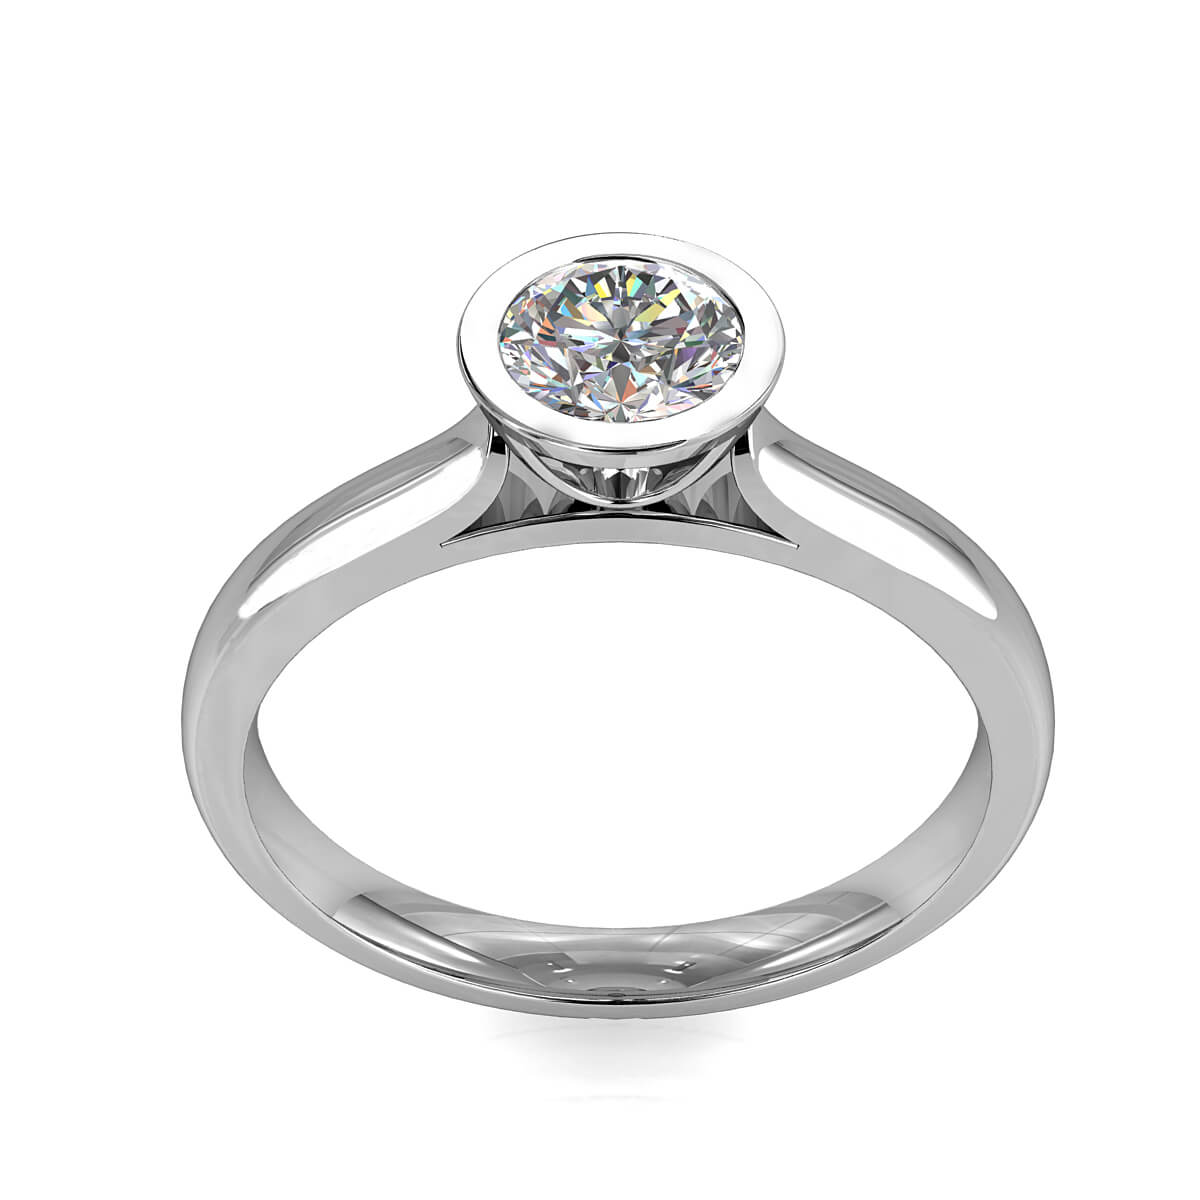 Round Brilliant Cut Solitaire Diamond Engagement Ring, Bezel Set on a Half Domed Band with Classic Open Undersetting.